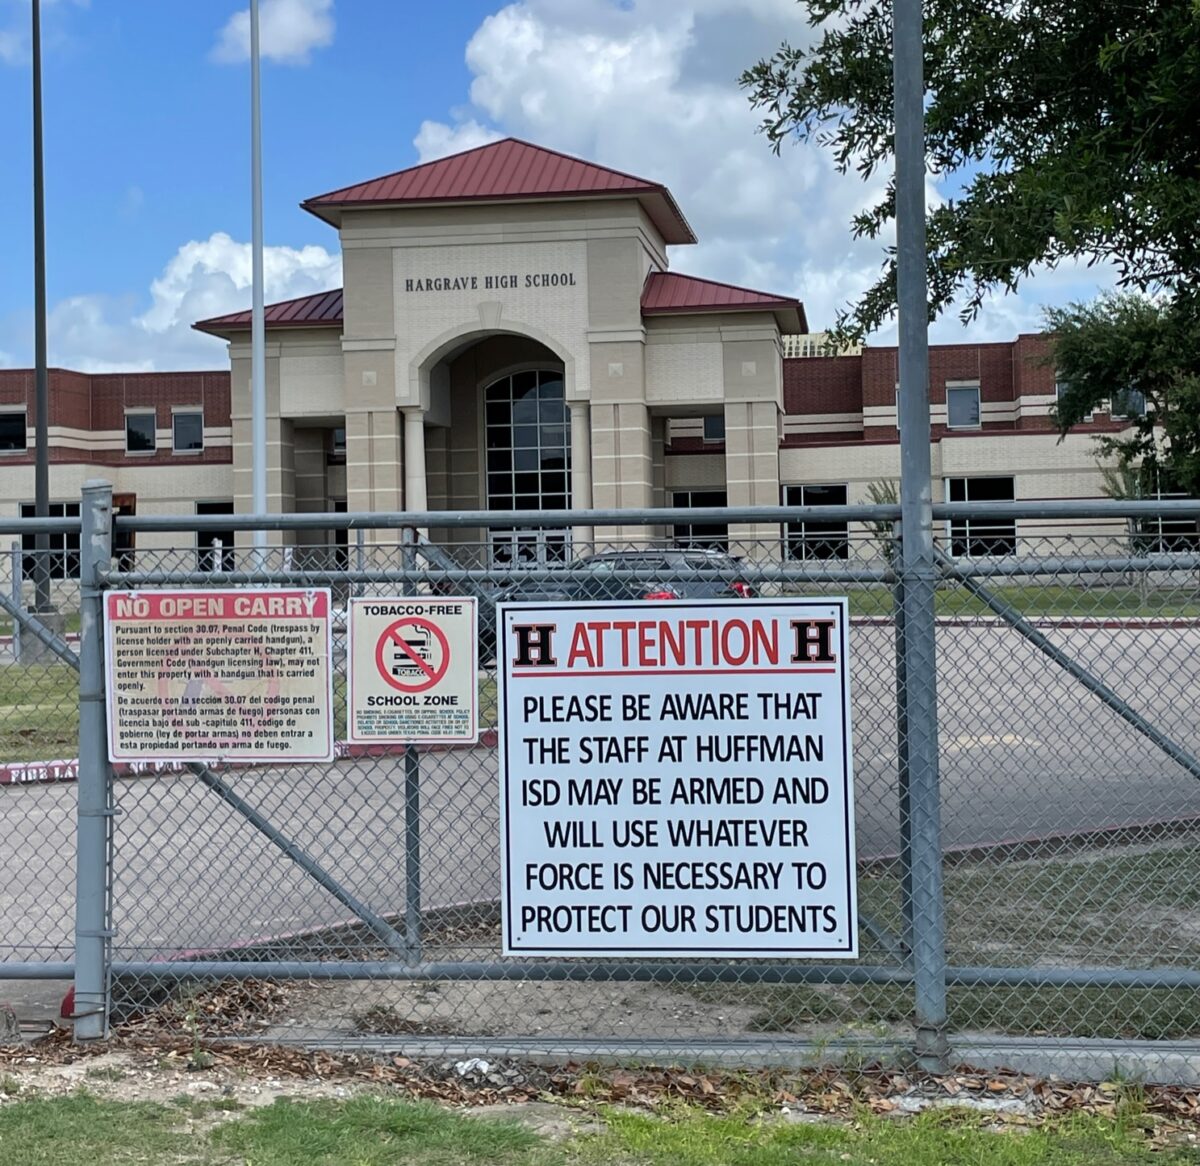 Signage at Hargrave High School in the Huffman Independent School District in Texas warns those who may enter school property with ill intent that open carry is prohibited and that staff may be armed with concealed weapons and will use whatever force is necessary to protect the students in their charge. 